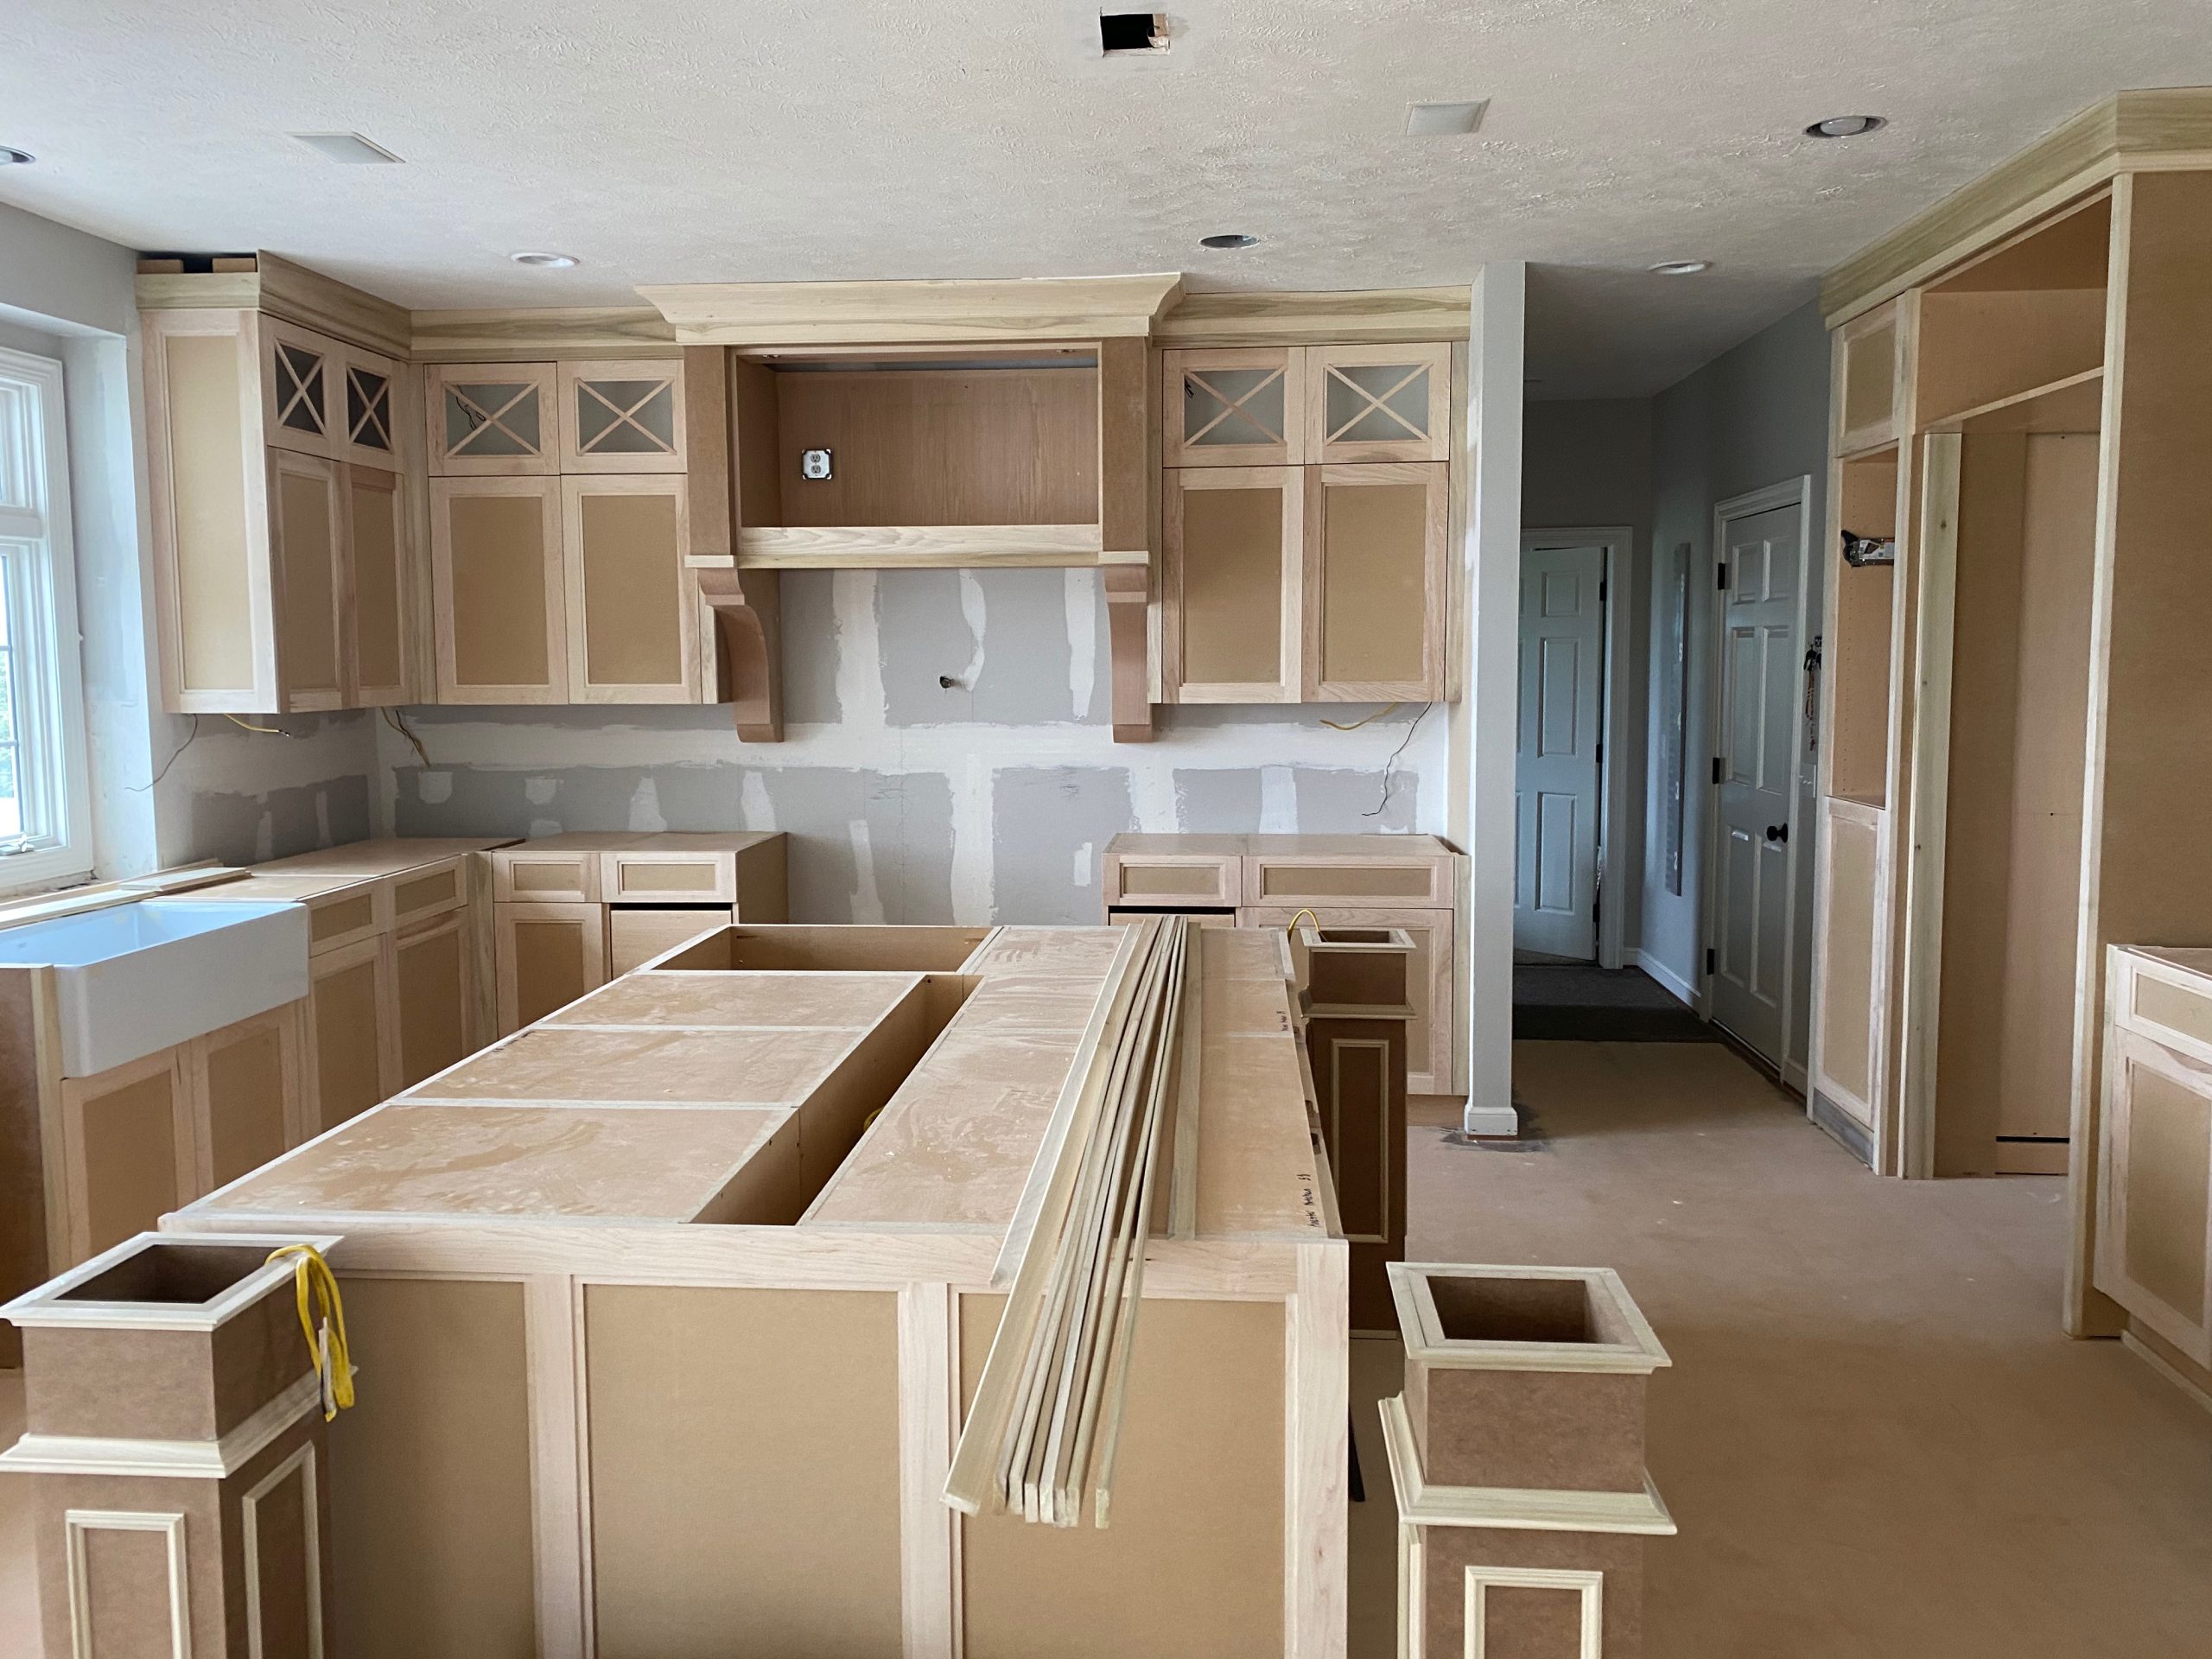 New Custom Cabinets - Kitchens Redefined : Kitchens Redefined